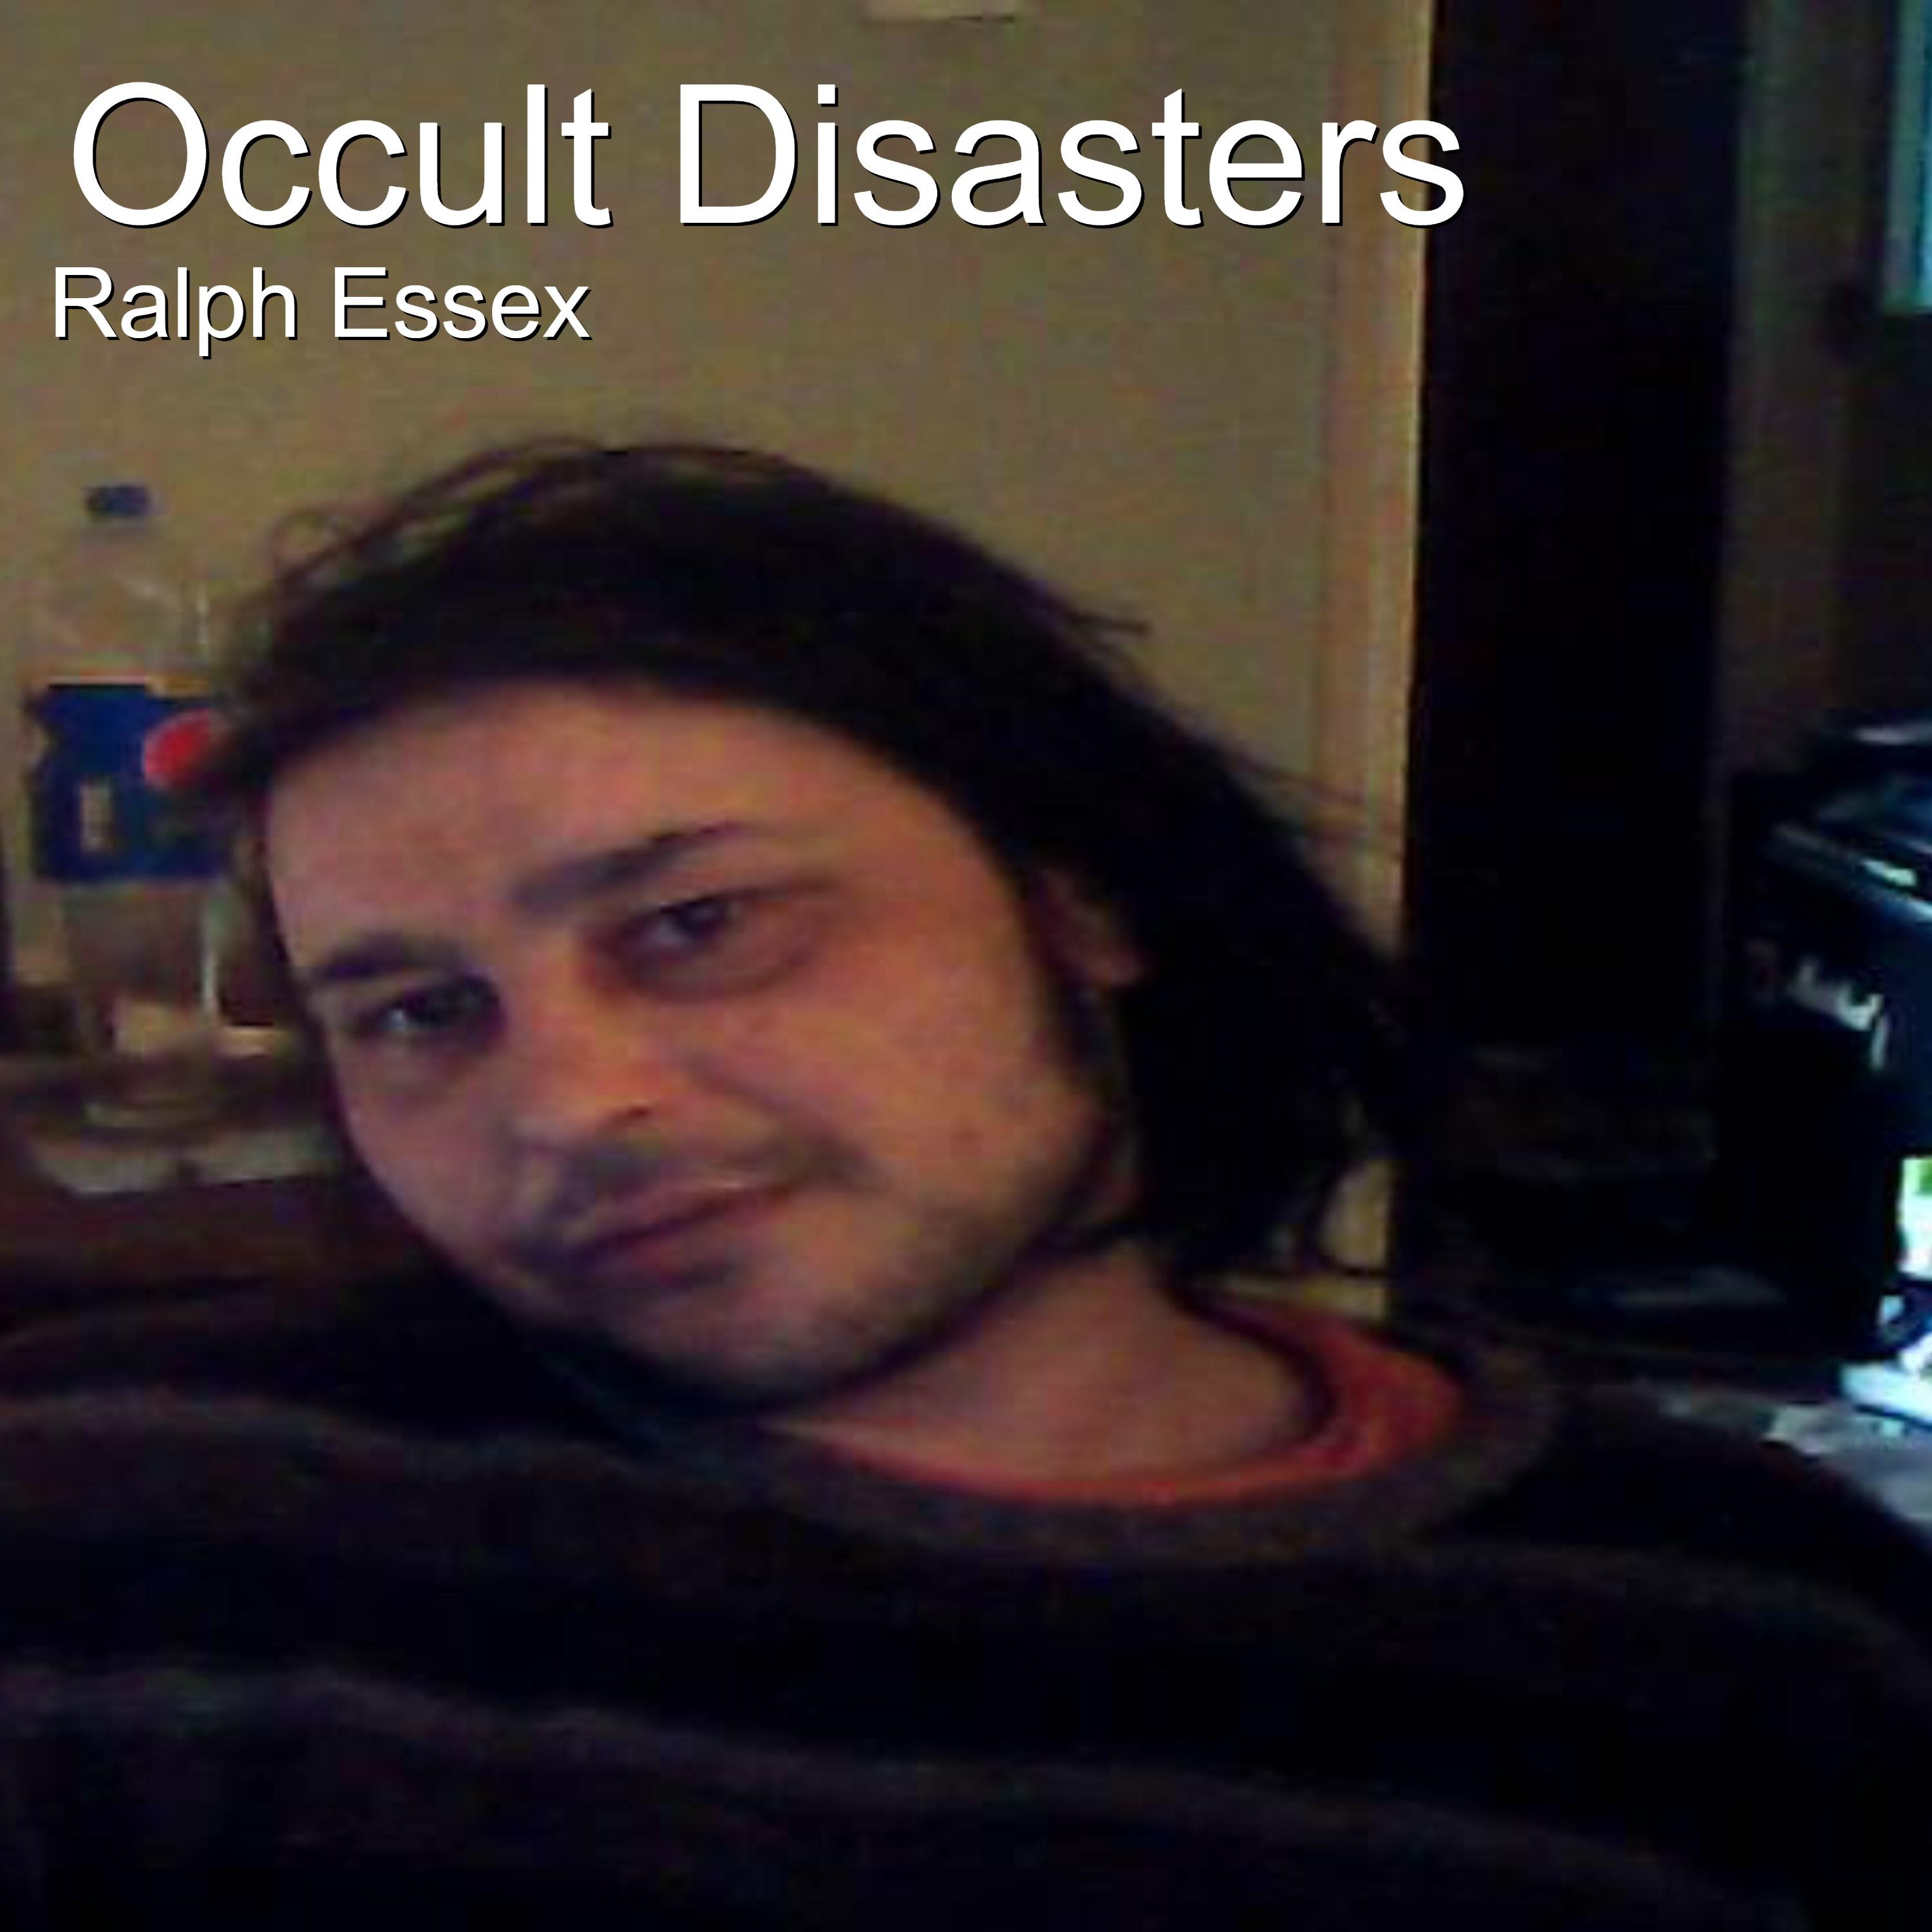 Occult Disasters